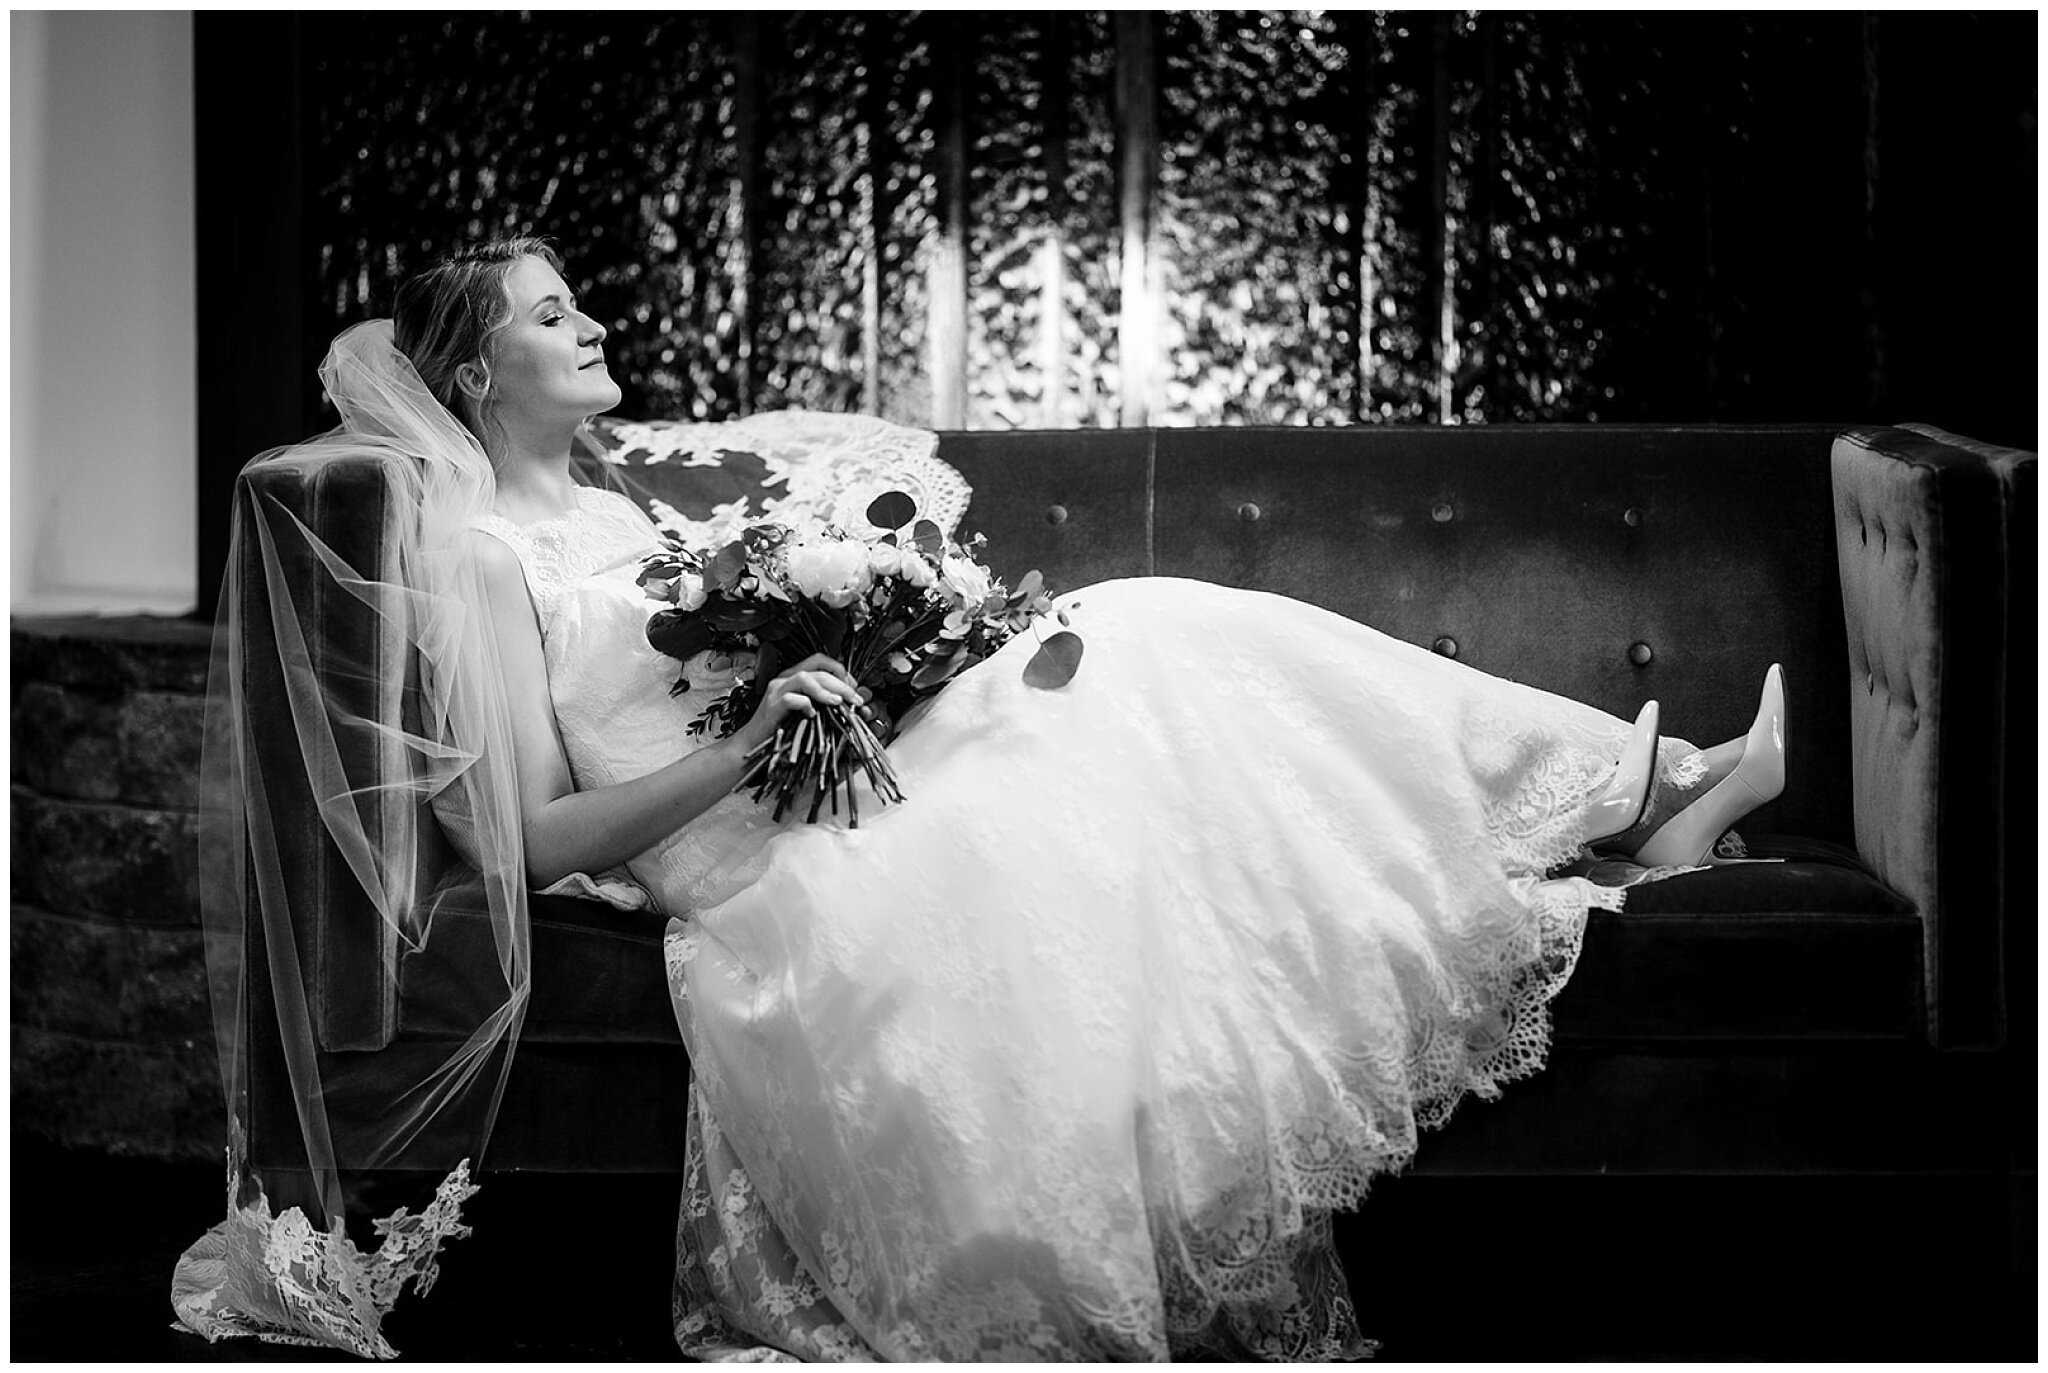  Wedding Photography by www.robbmccormick.com ©2021 